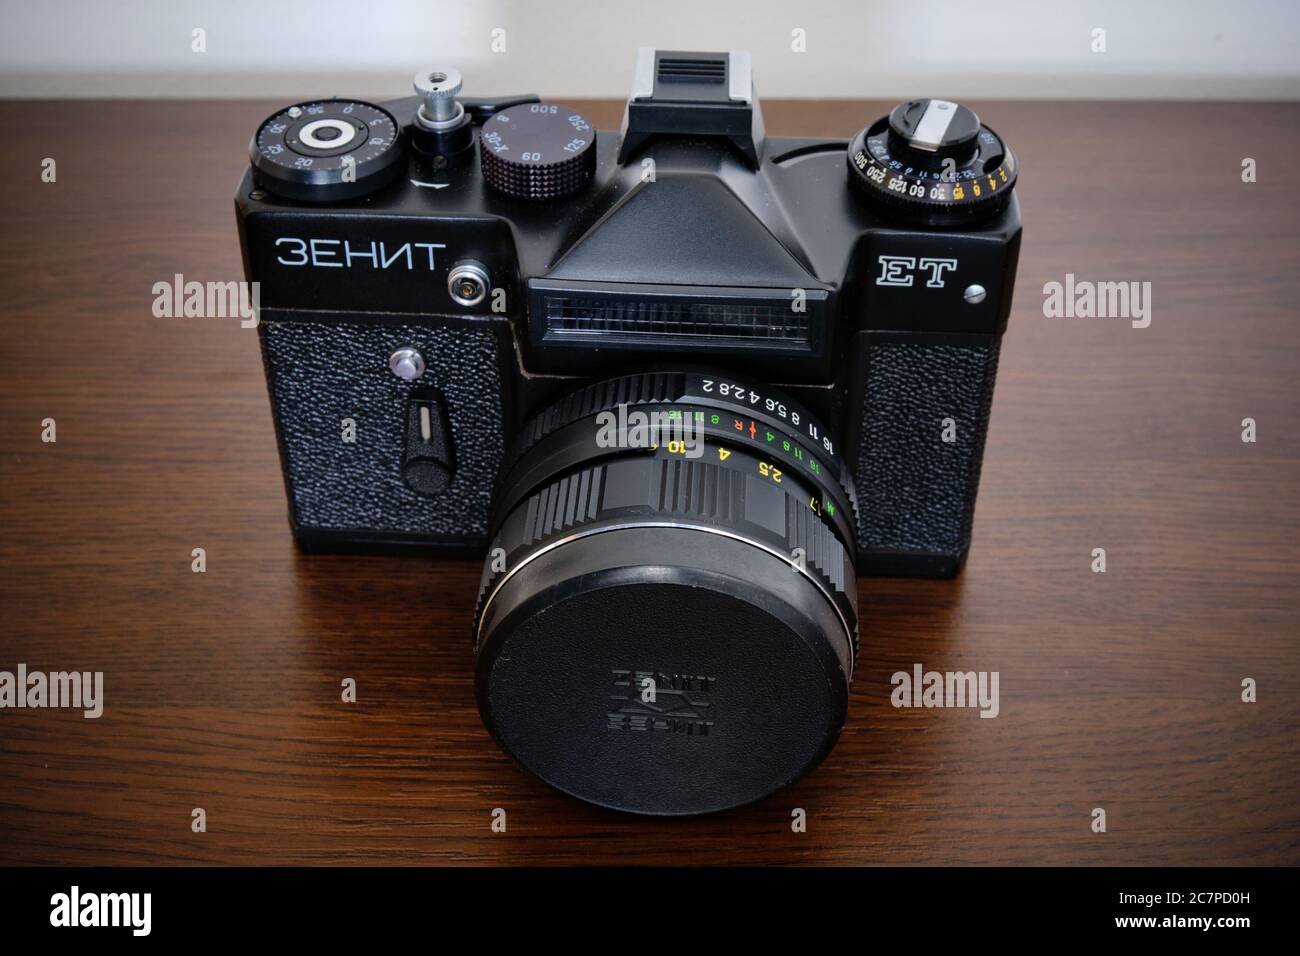 Moscow / Russia - January 1, 2020: Old Soviet analog 35 mm SLR film camera Zenit ET, with Helios 44M-4 58 mm lens Stock Photo